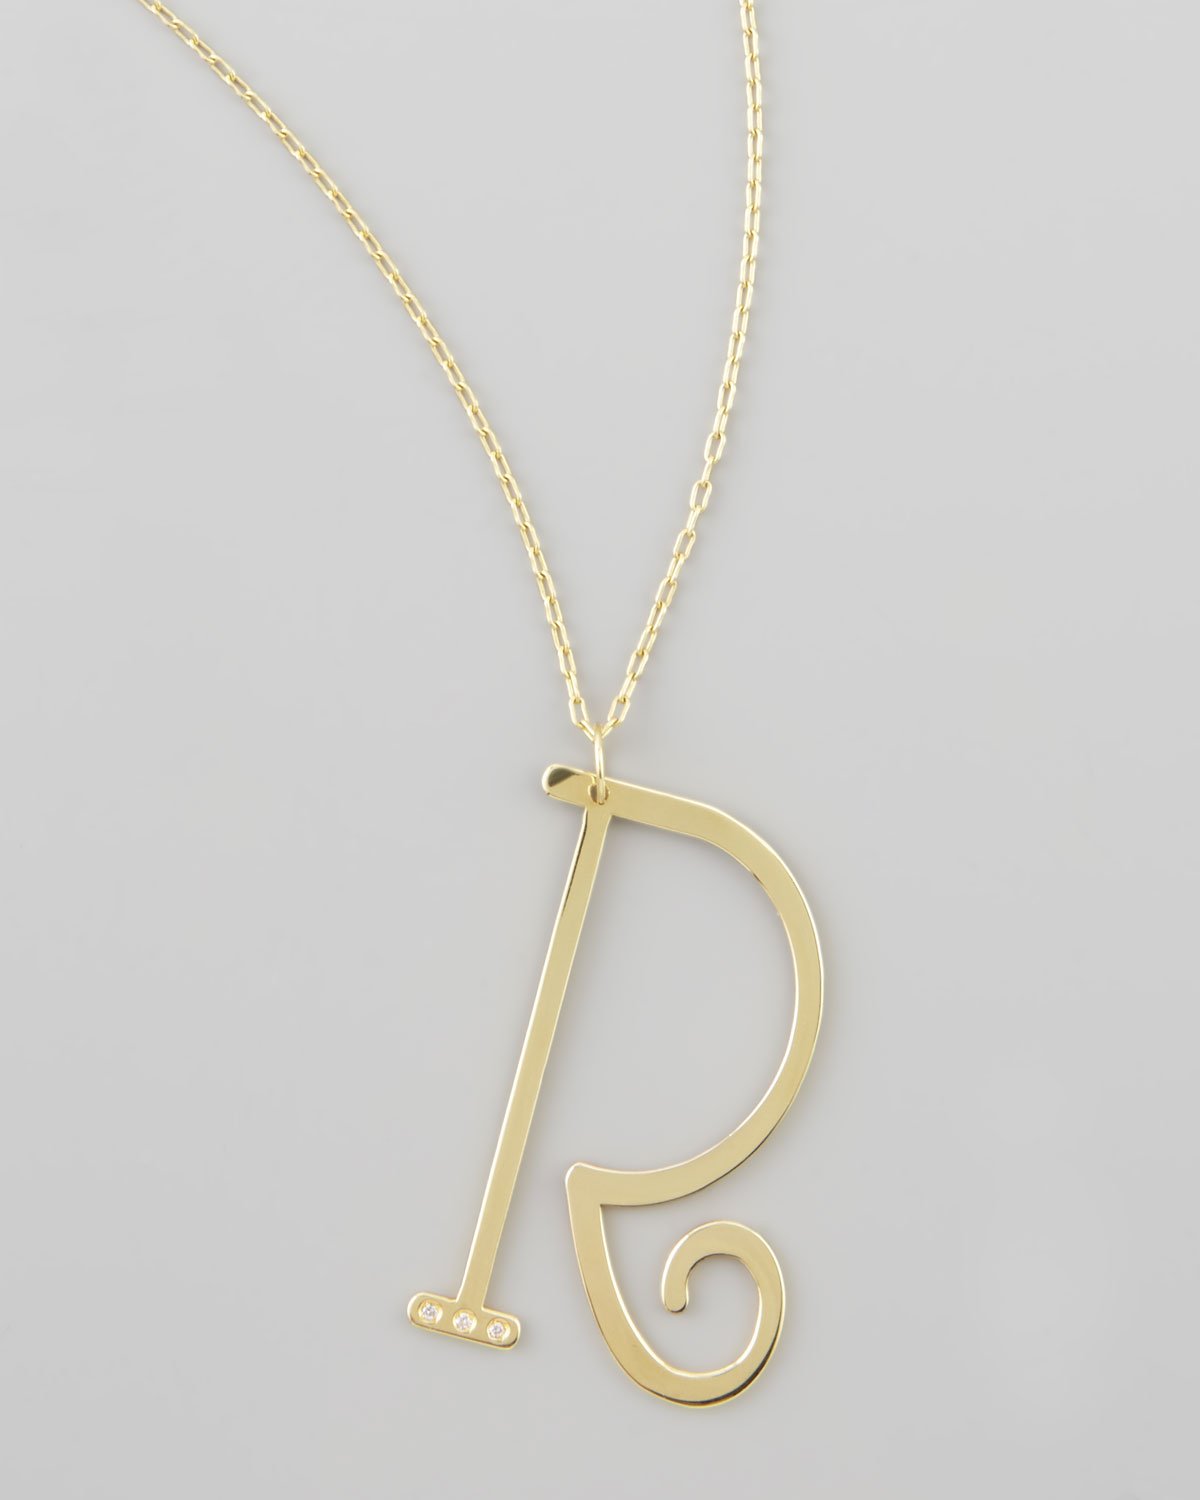 Lyst - Kacey K Large 14K Gold Initial Pendant Necklace in ...